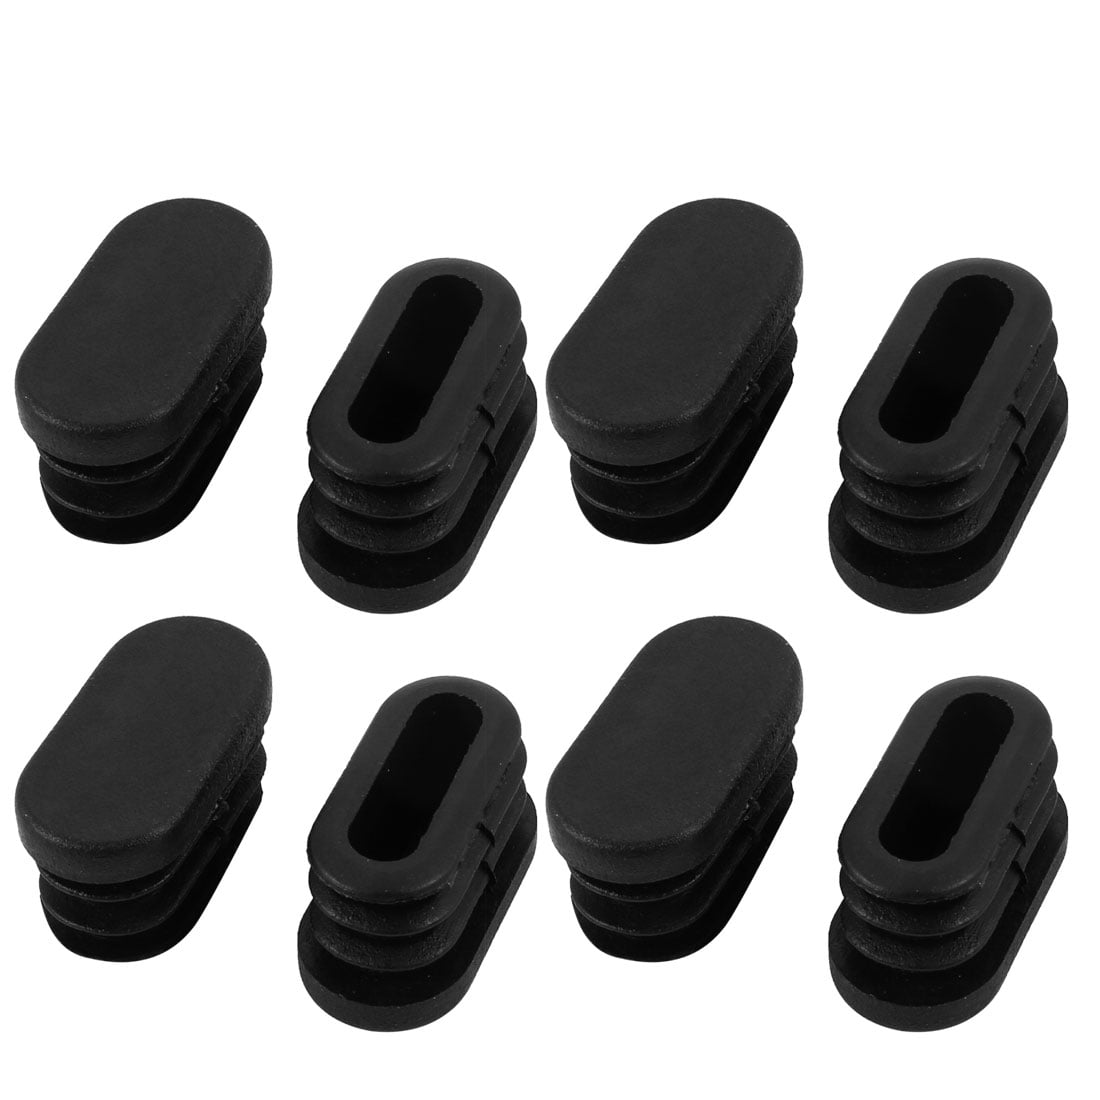 Oval Rocker Bottom Plastic Glides for Hollow Chair/Table Legs Set of 4 